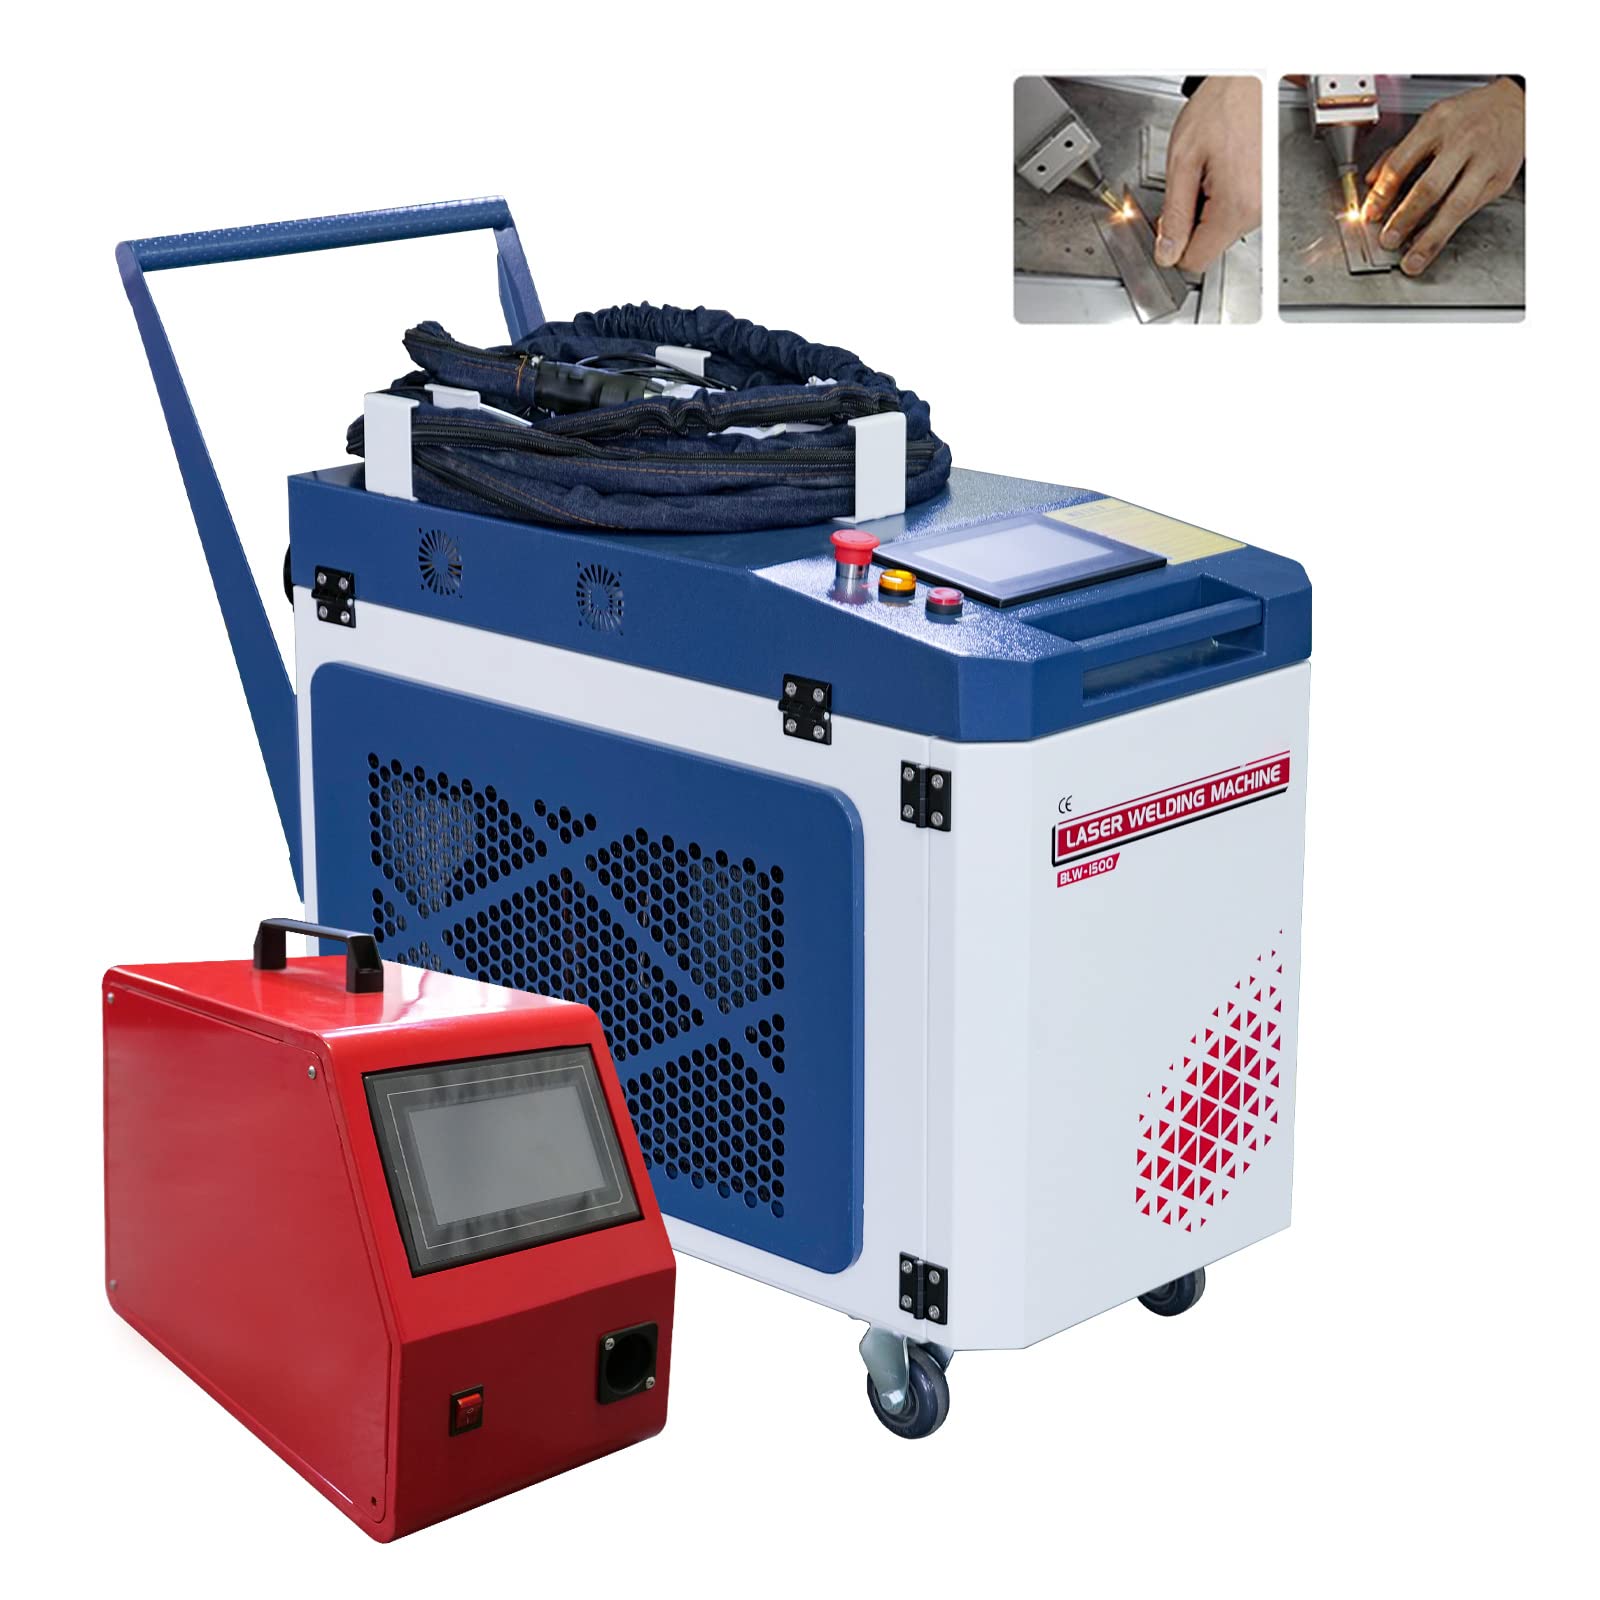 1500Watt MAX Fiber Laser Welder BLW-1500 Handheld Laser Welding Machine with Auto Wire Feeder, Integrated Water-Cooler Chassis for All Type of Metal 220V Single-Phase